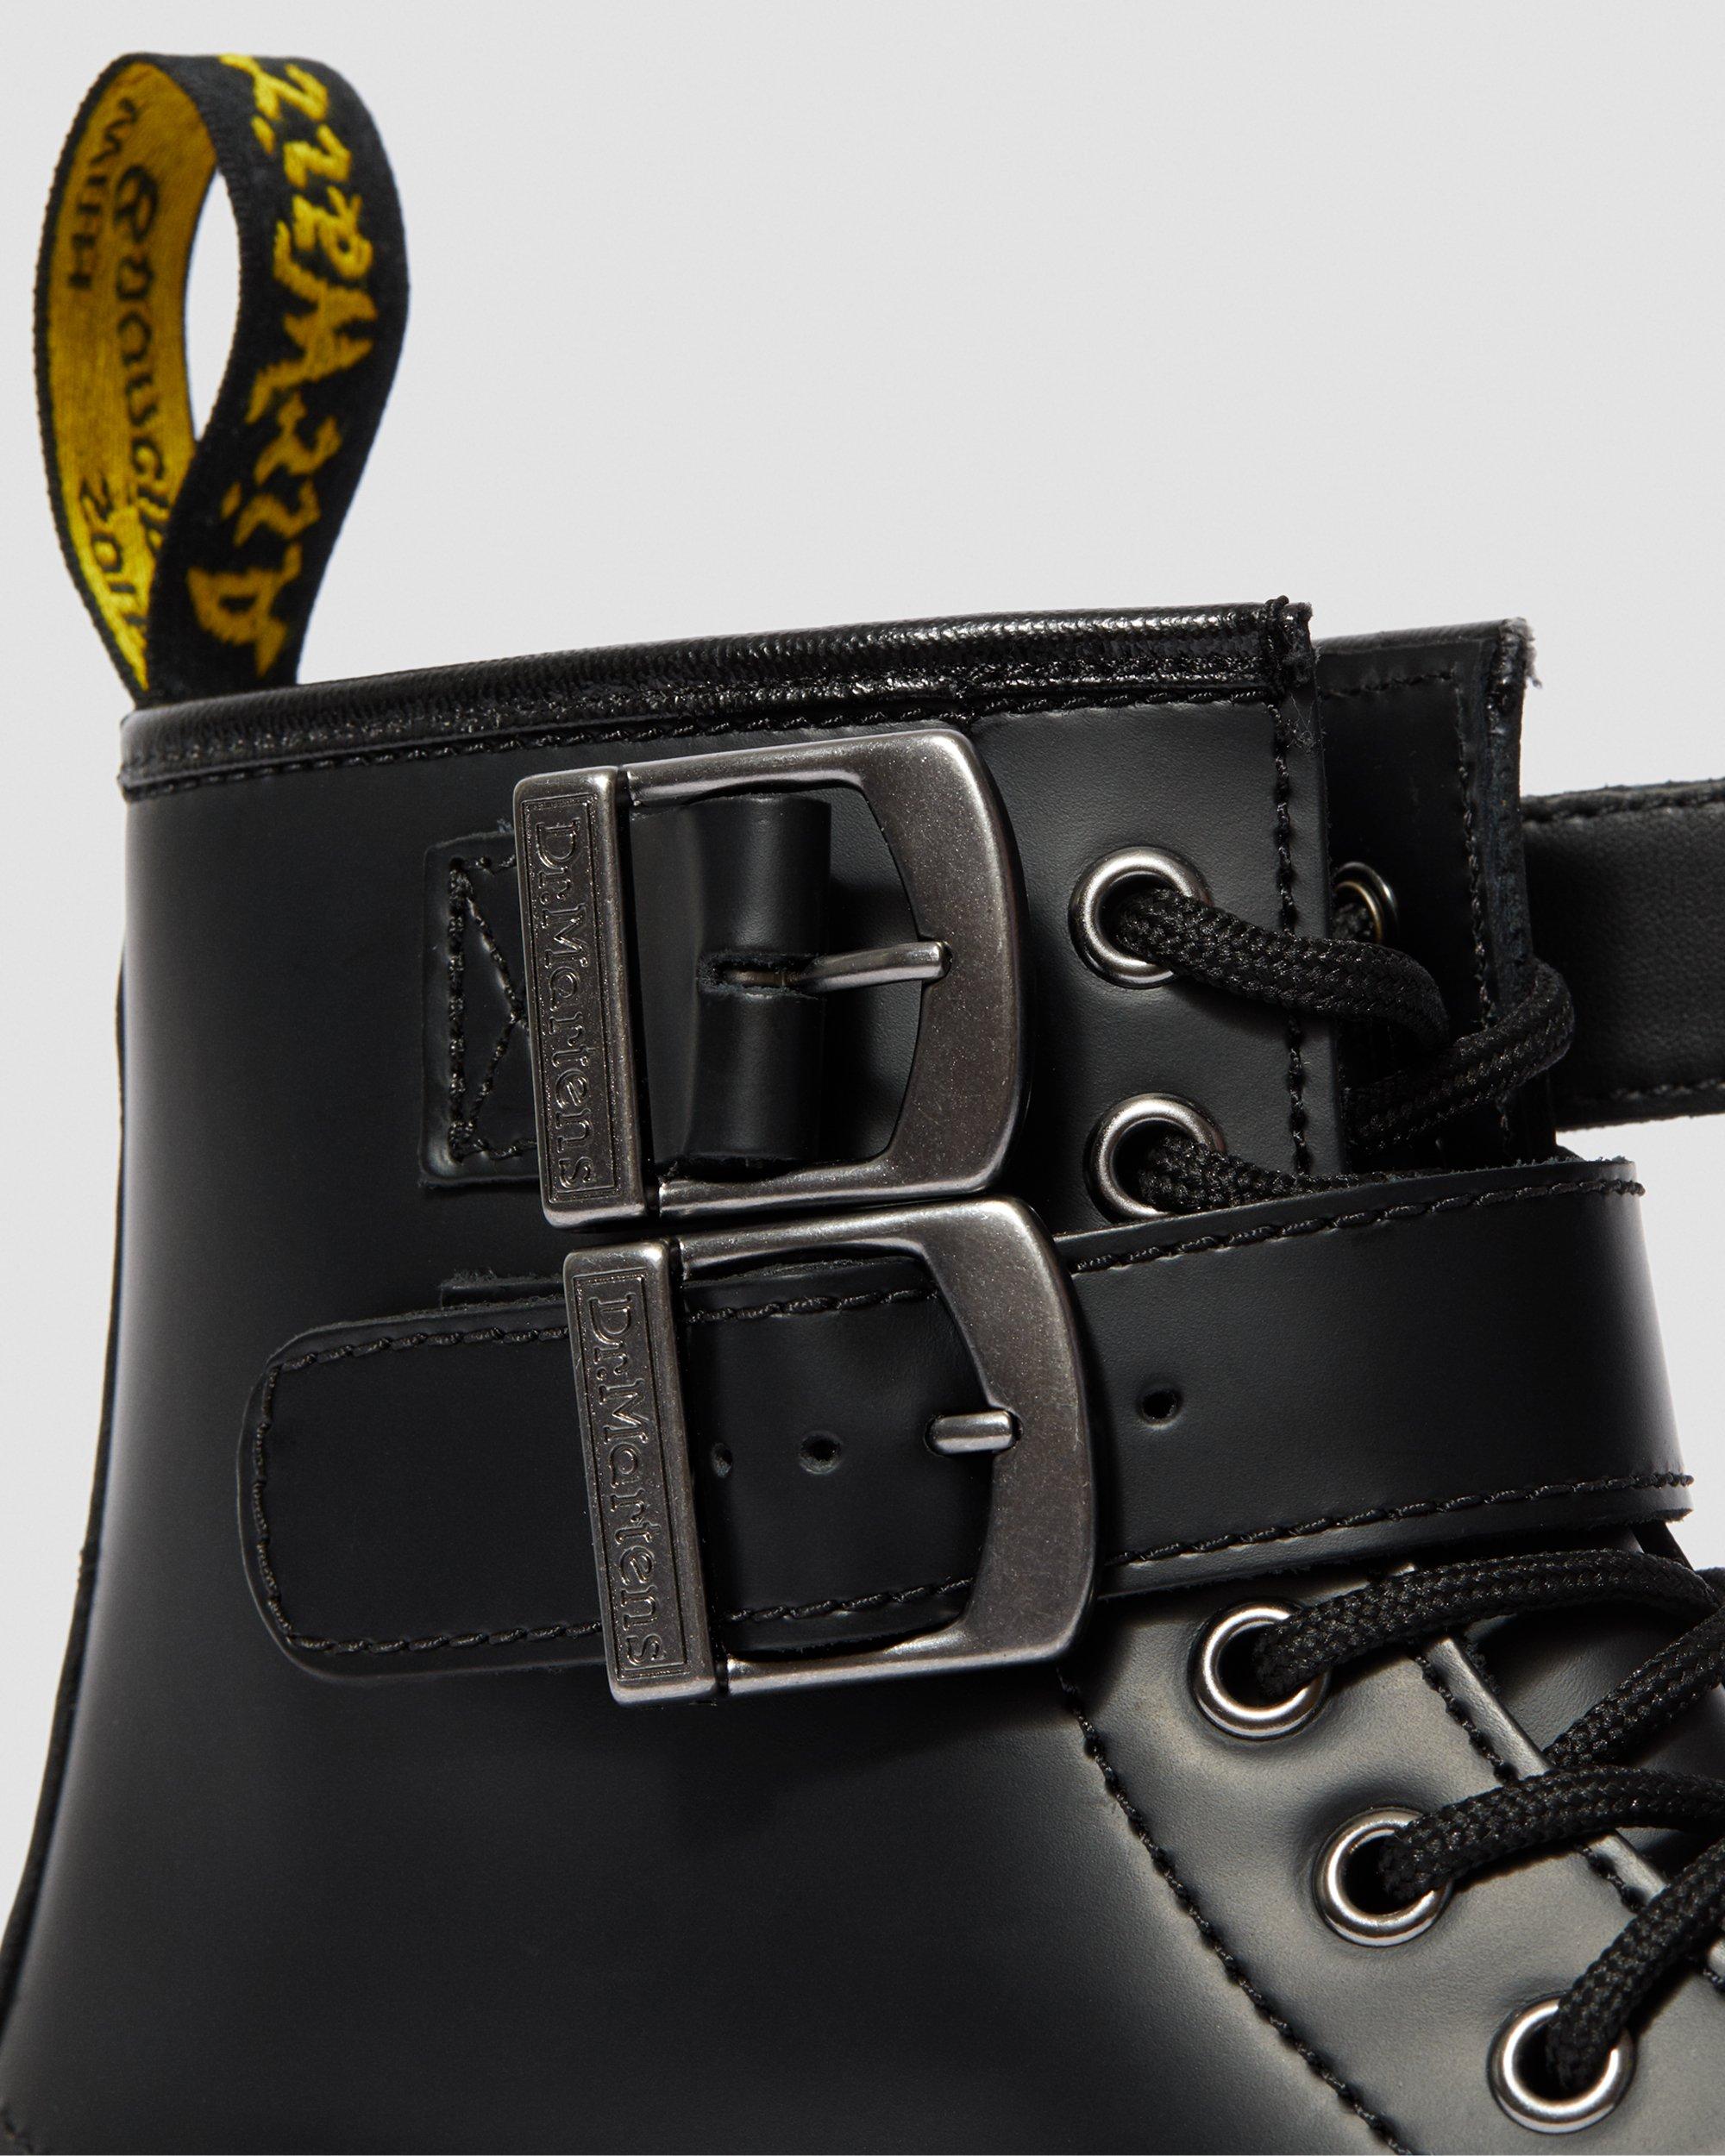 DR MARTENS 1460 Smooth Leather Buckle Boots